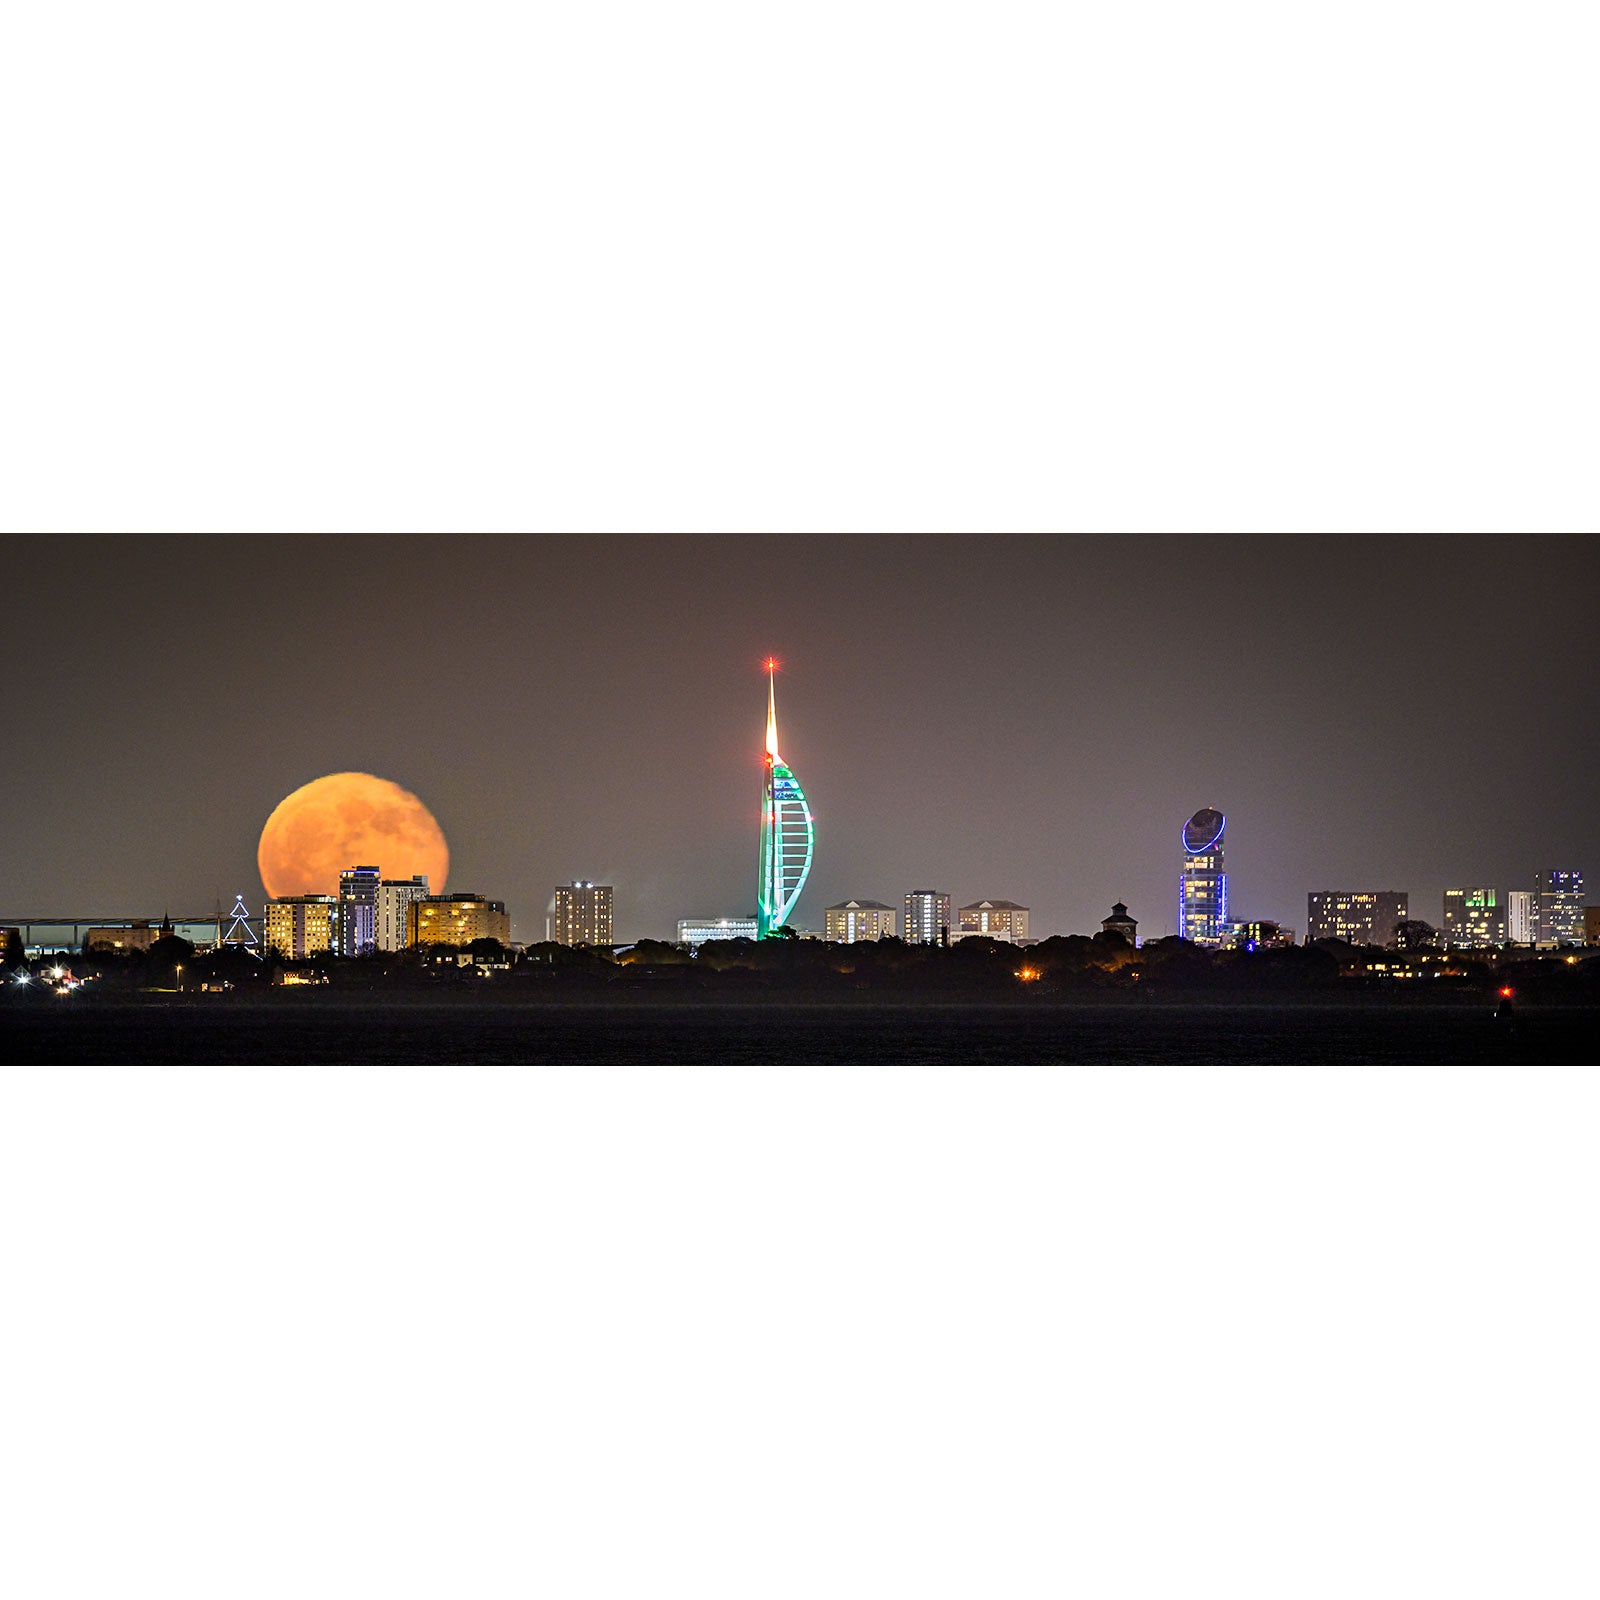 A Moonrise Spinnaker Tower rising behind a city skyline on the Isle of Wight, with an illuminated skyscraper at night. By Available Light Photography.